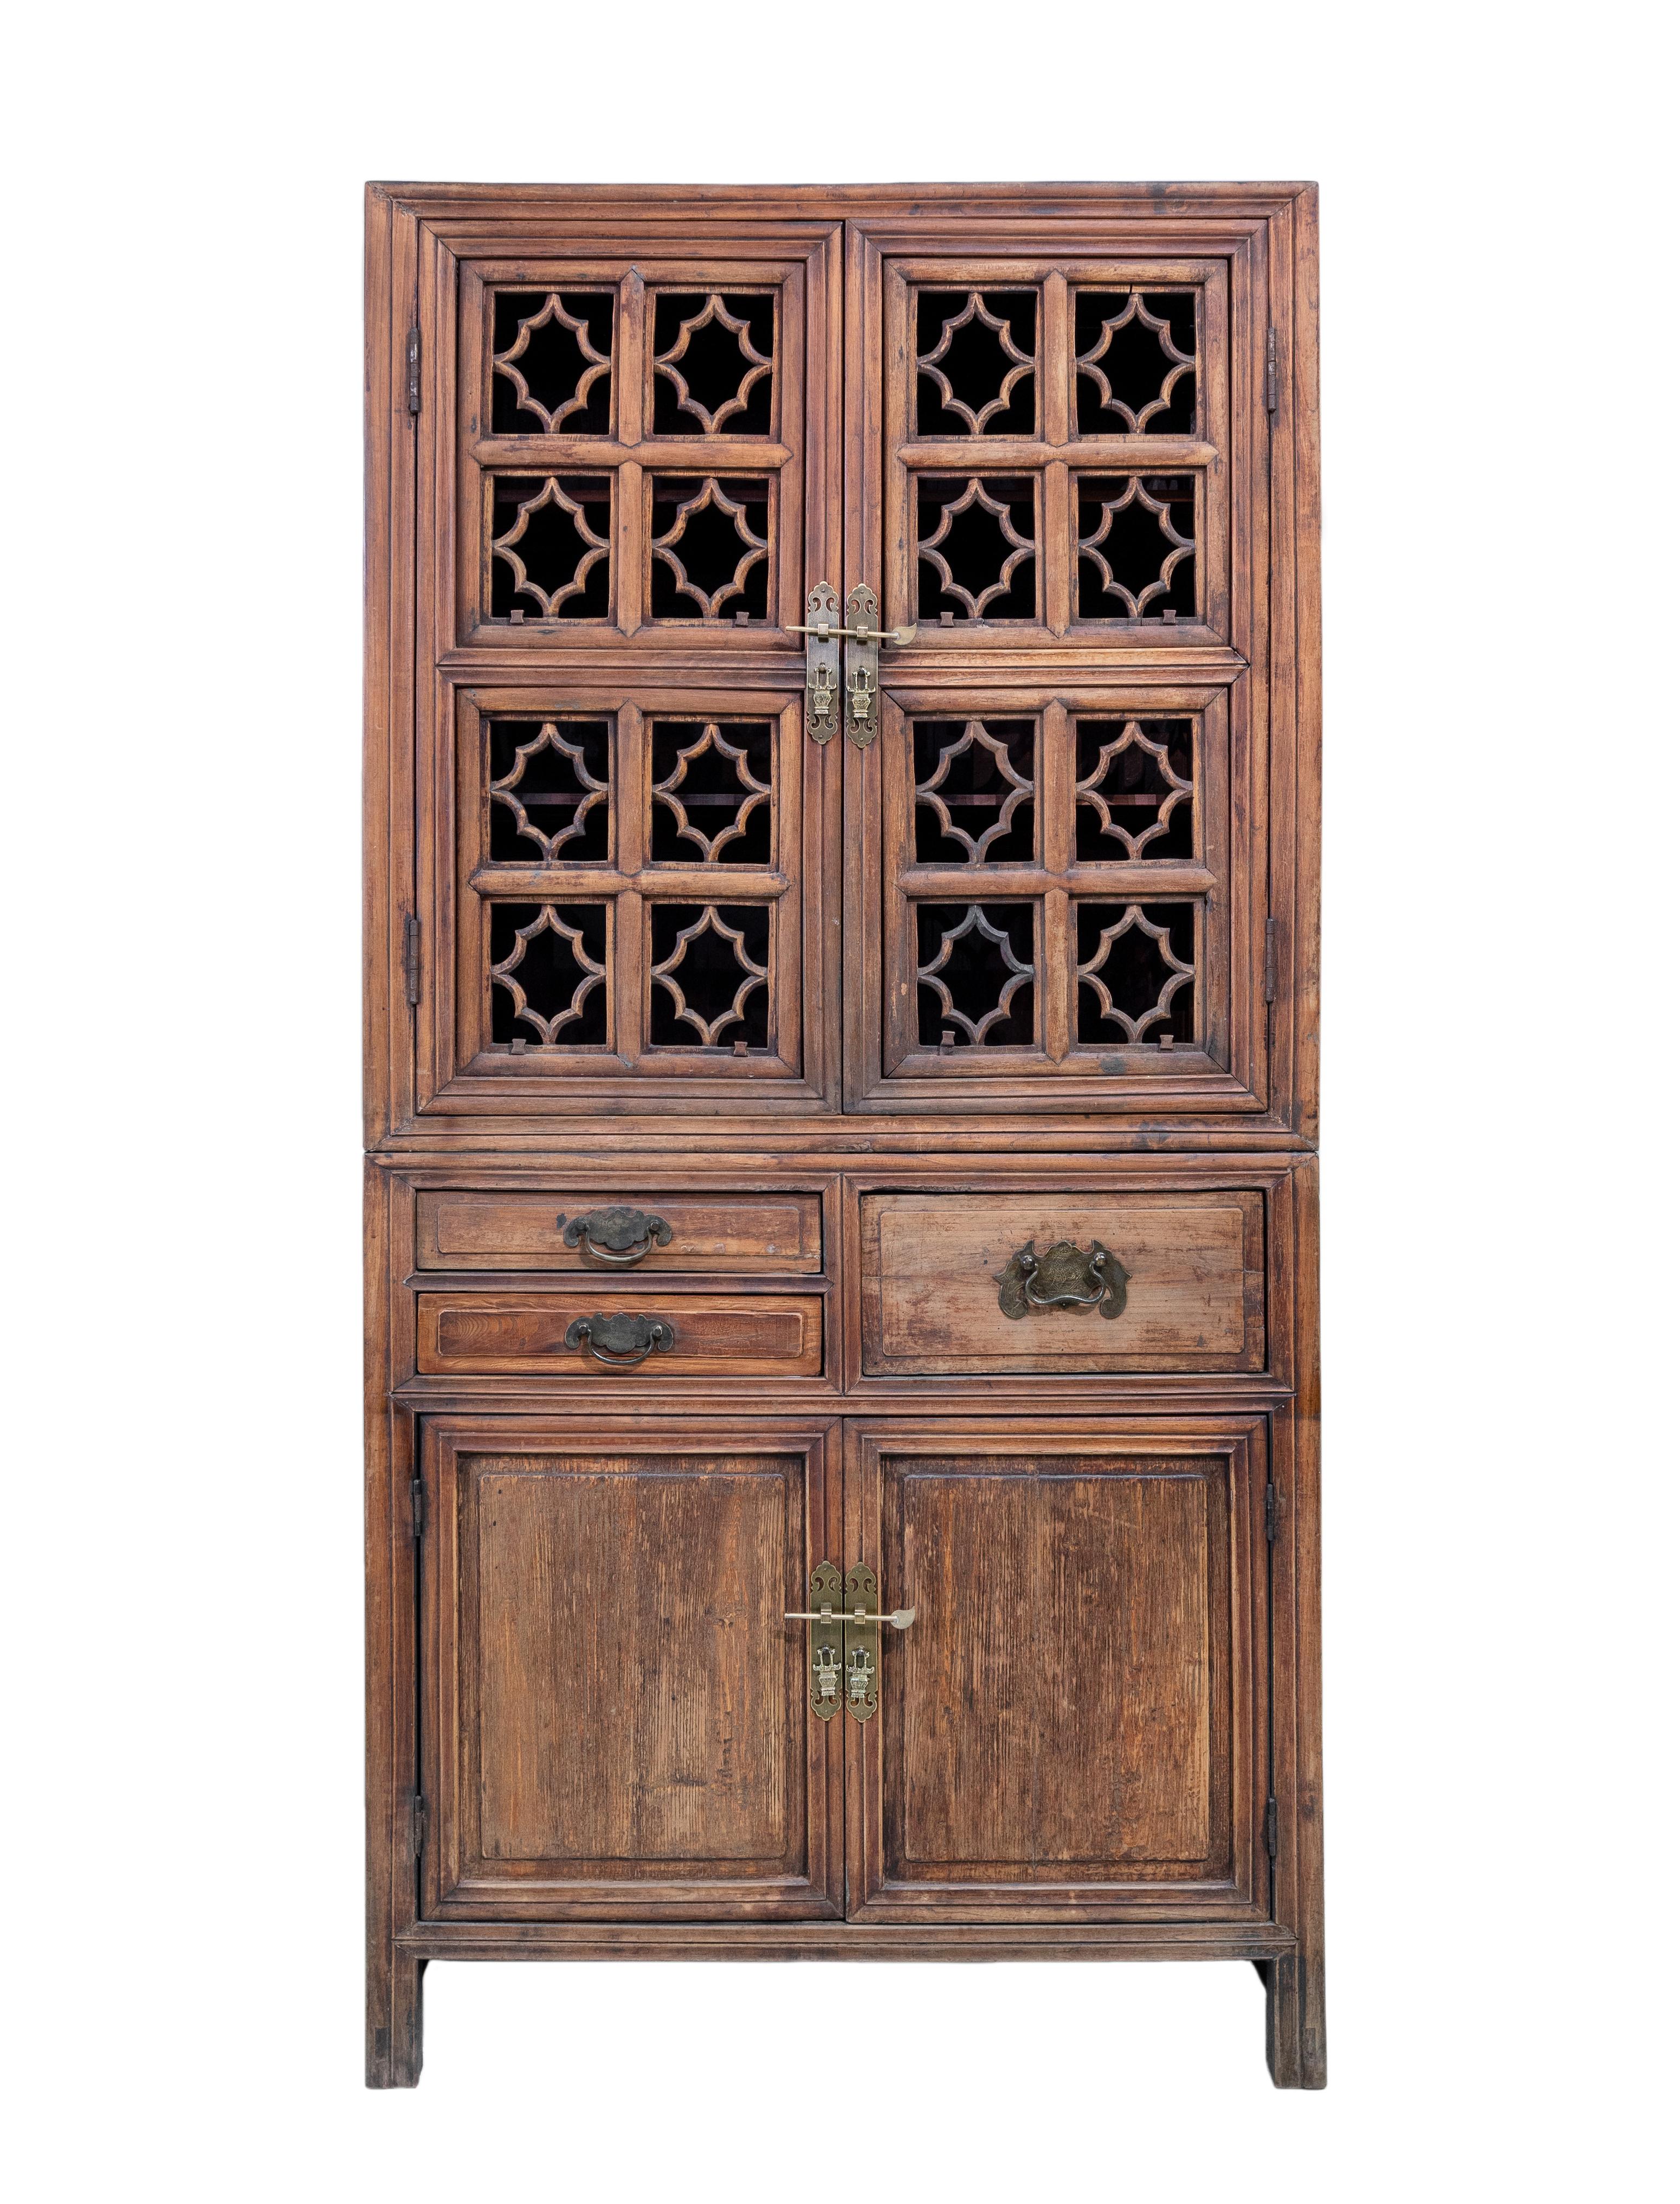 An early 20th century kitchen cabinet from Zhejiang, China. This cabinet has an unusual lattice pattern on the front and sides, and the lattice panels has wooden pegs which makes them removable. The openwork on the top half makes it suitable for